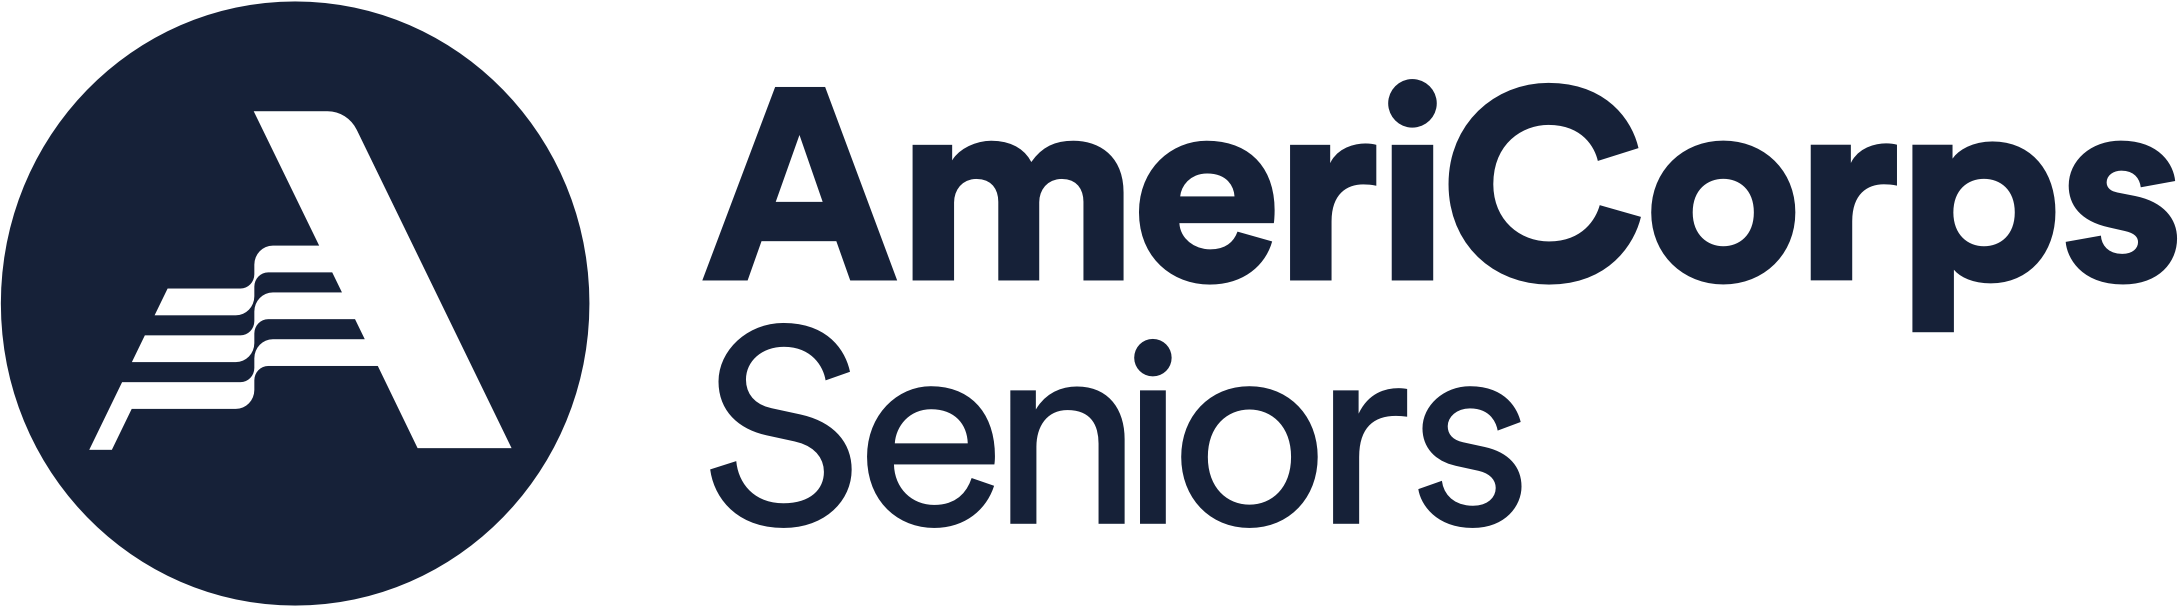 AmeriCorps logo featured in thick lettering with a navy blue color